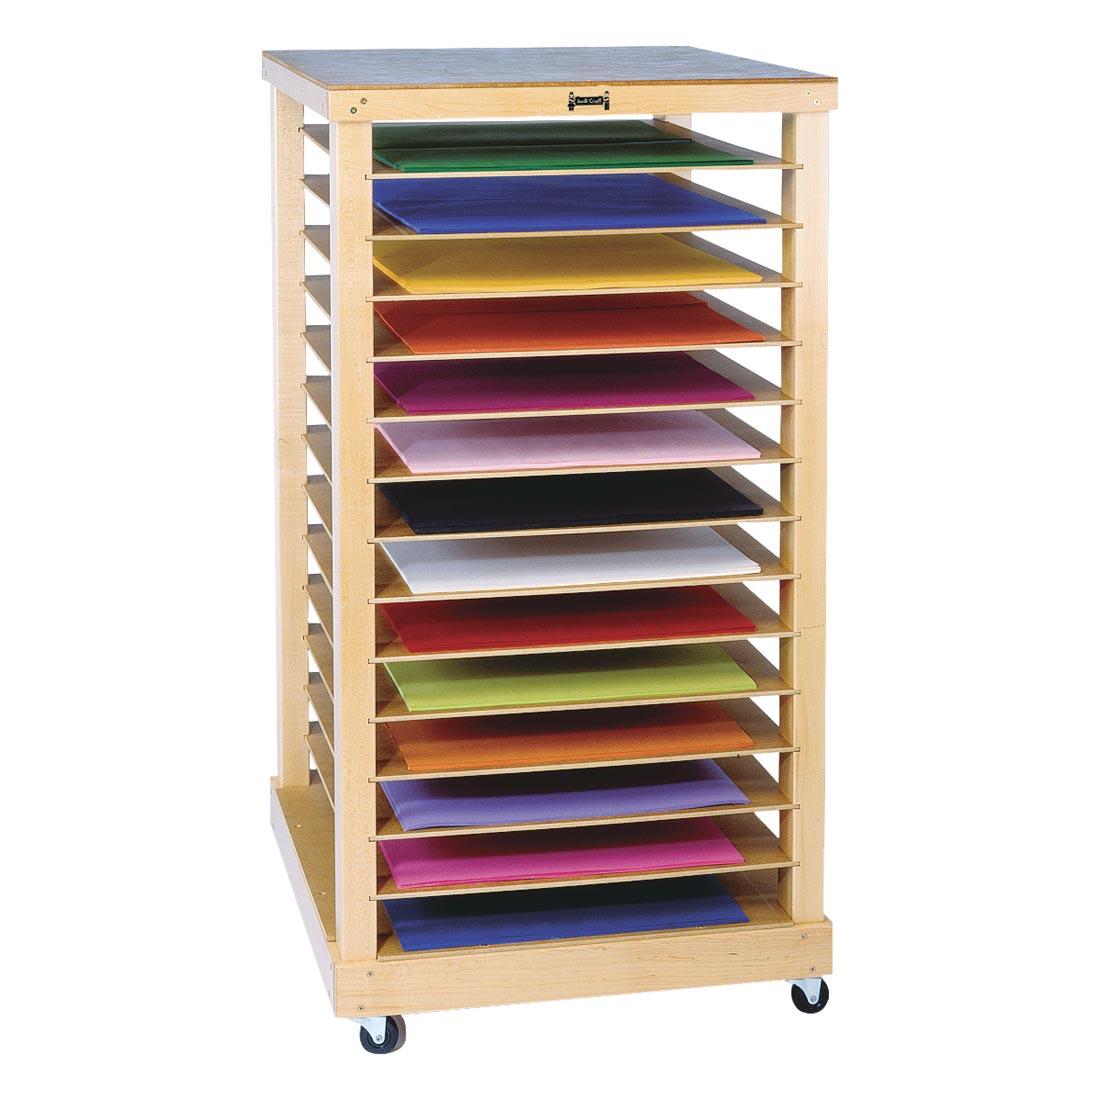 Mobile Paper Storage Rack shown with colorful paper on shelves